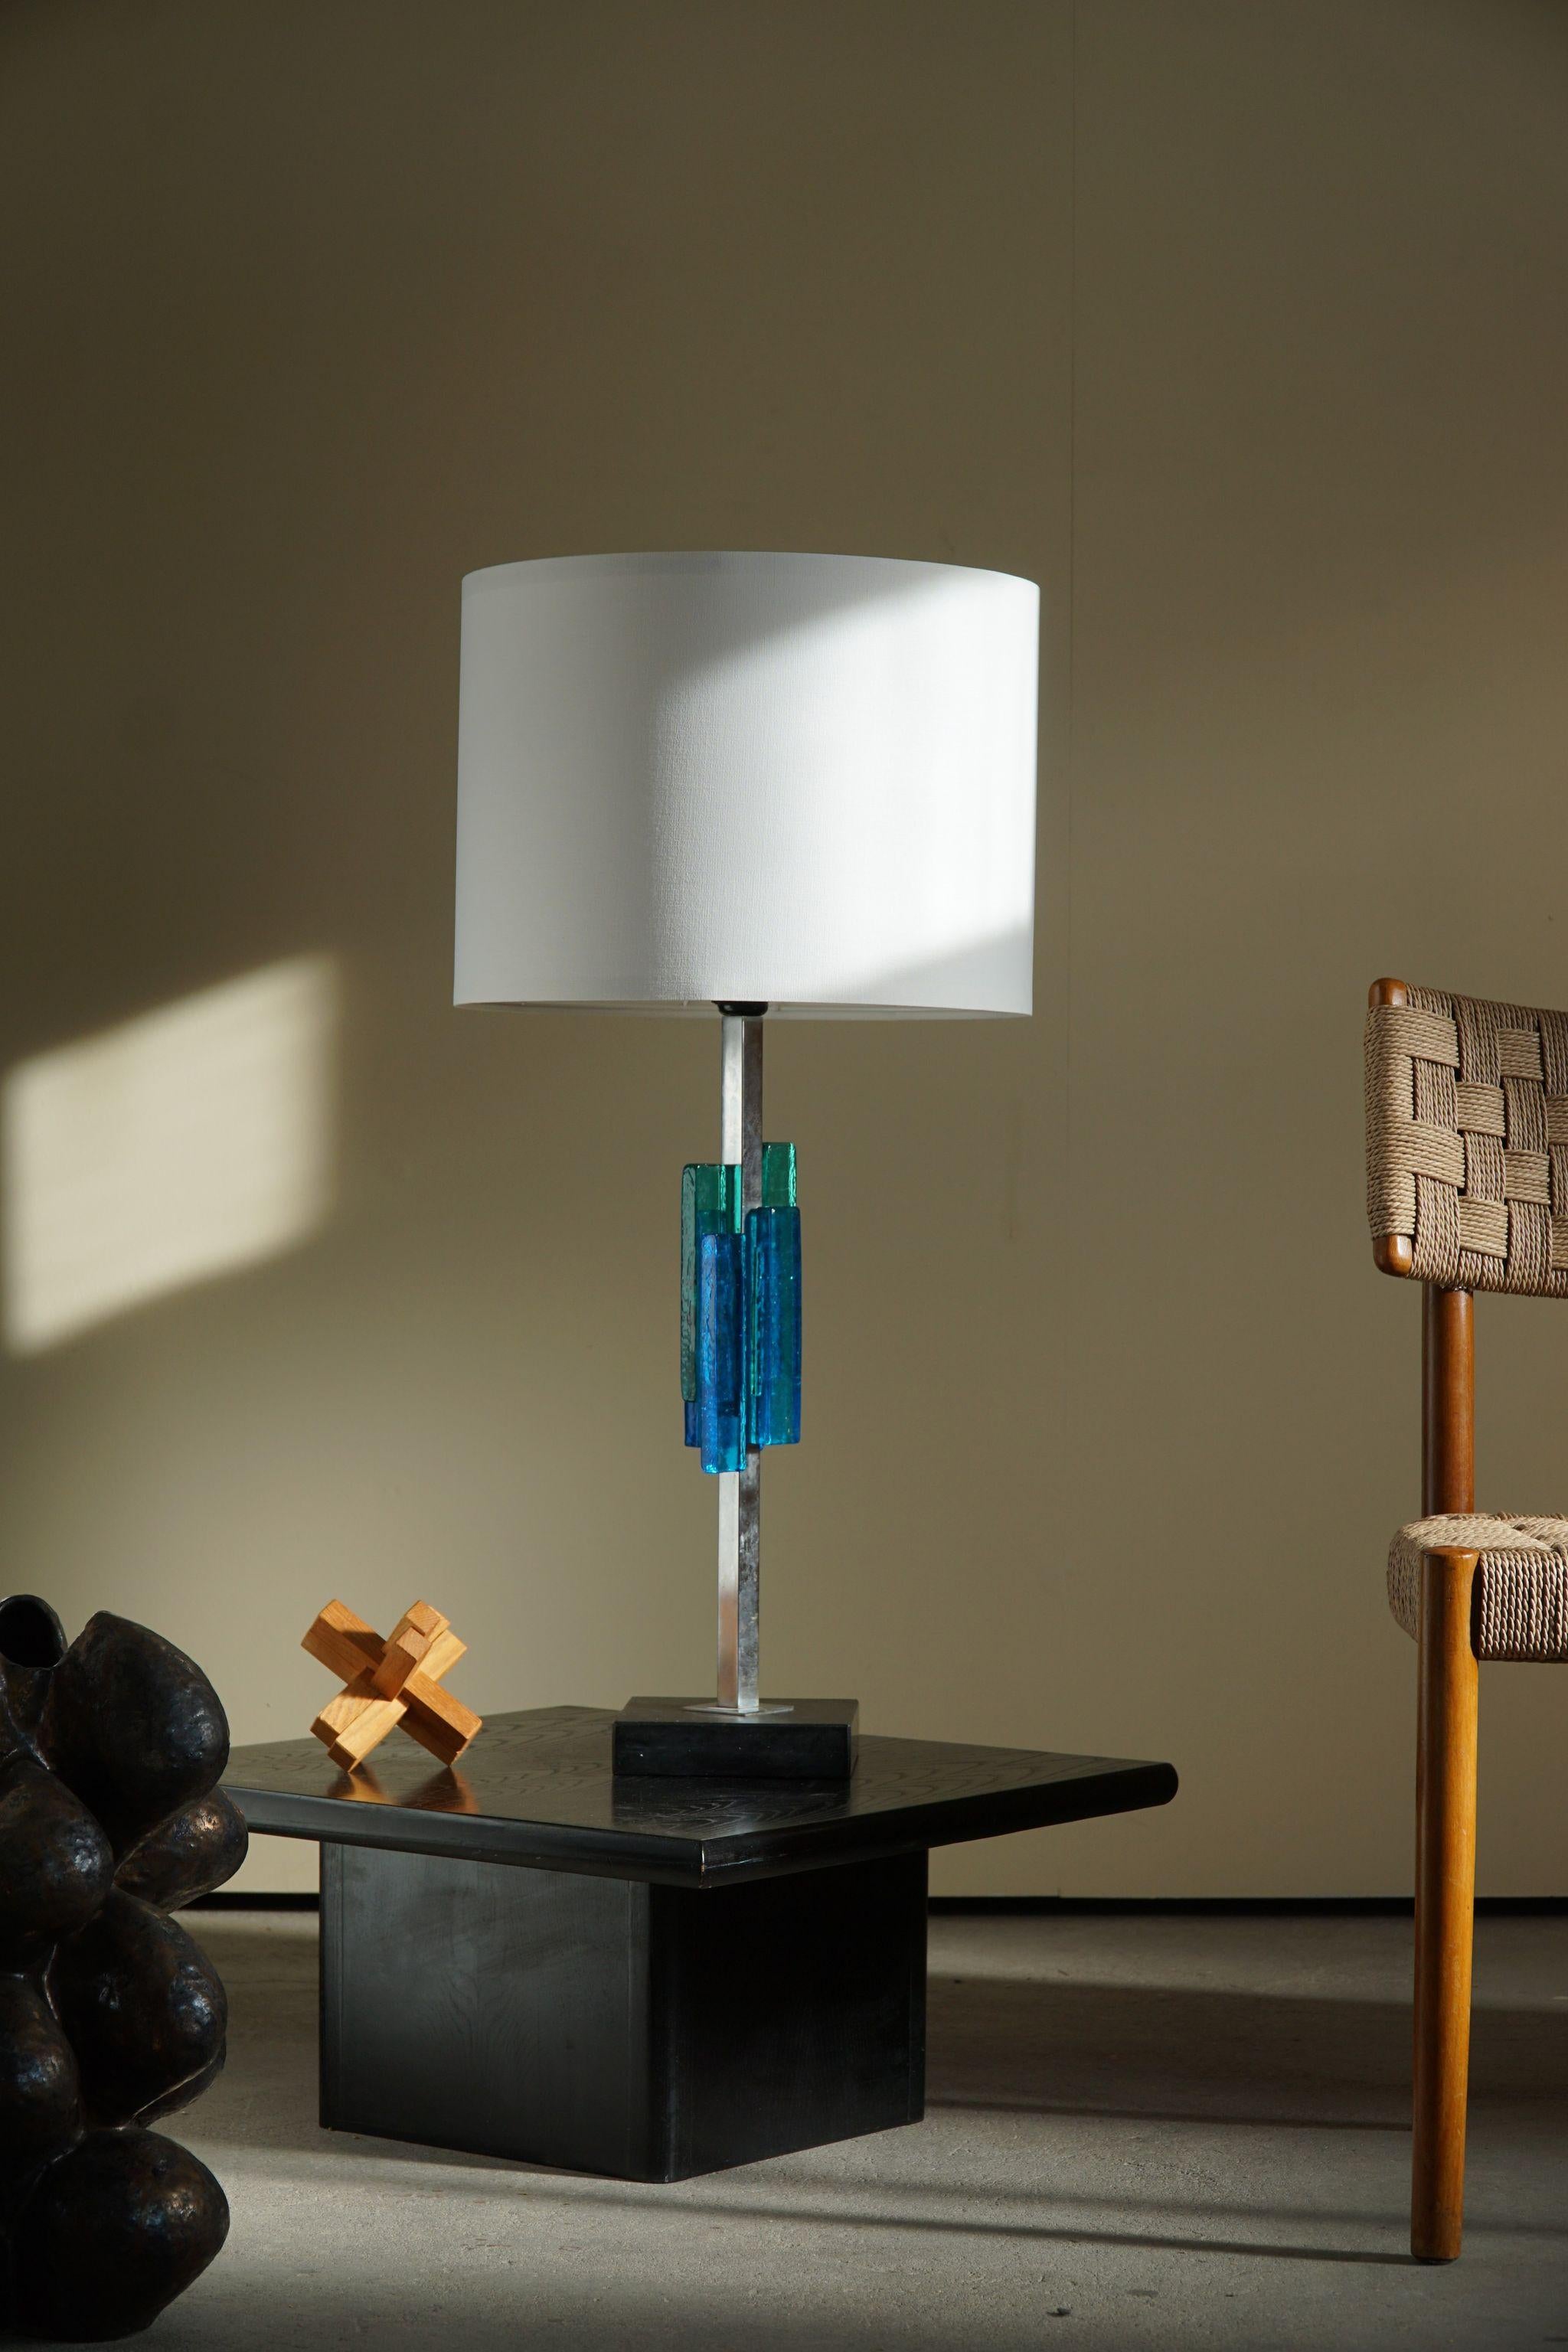 Table lamp in metal and glass in various blue colors. Designed by Svend Aage Holm Sørensen for hes own company in 1960s.

This piece is in a really good vintage condition.

Perfectly suited for any home decor. It would fit in any modern,